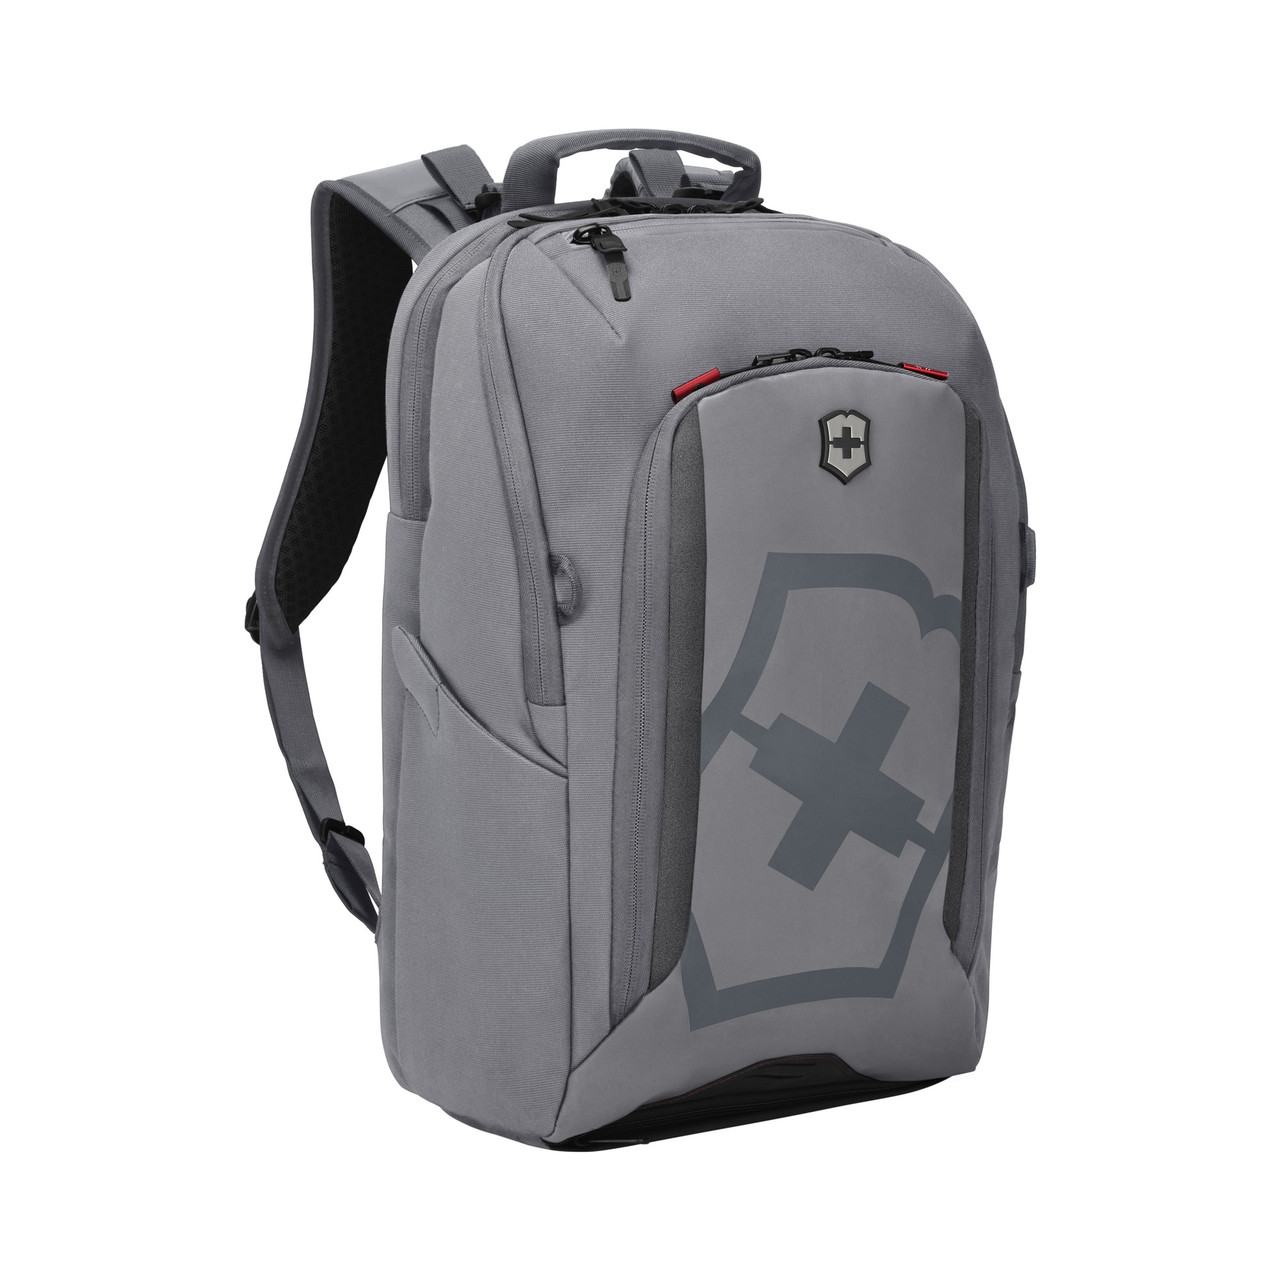 Hidesign - Save on Luggage, Carry ons , accessories , backpacks